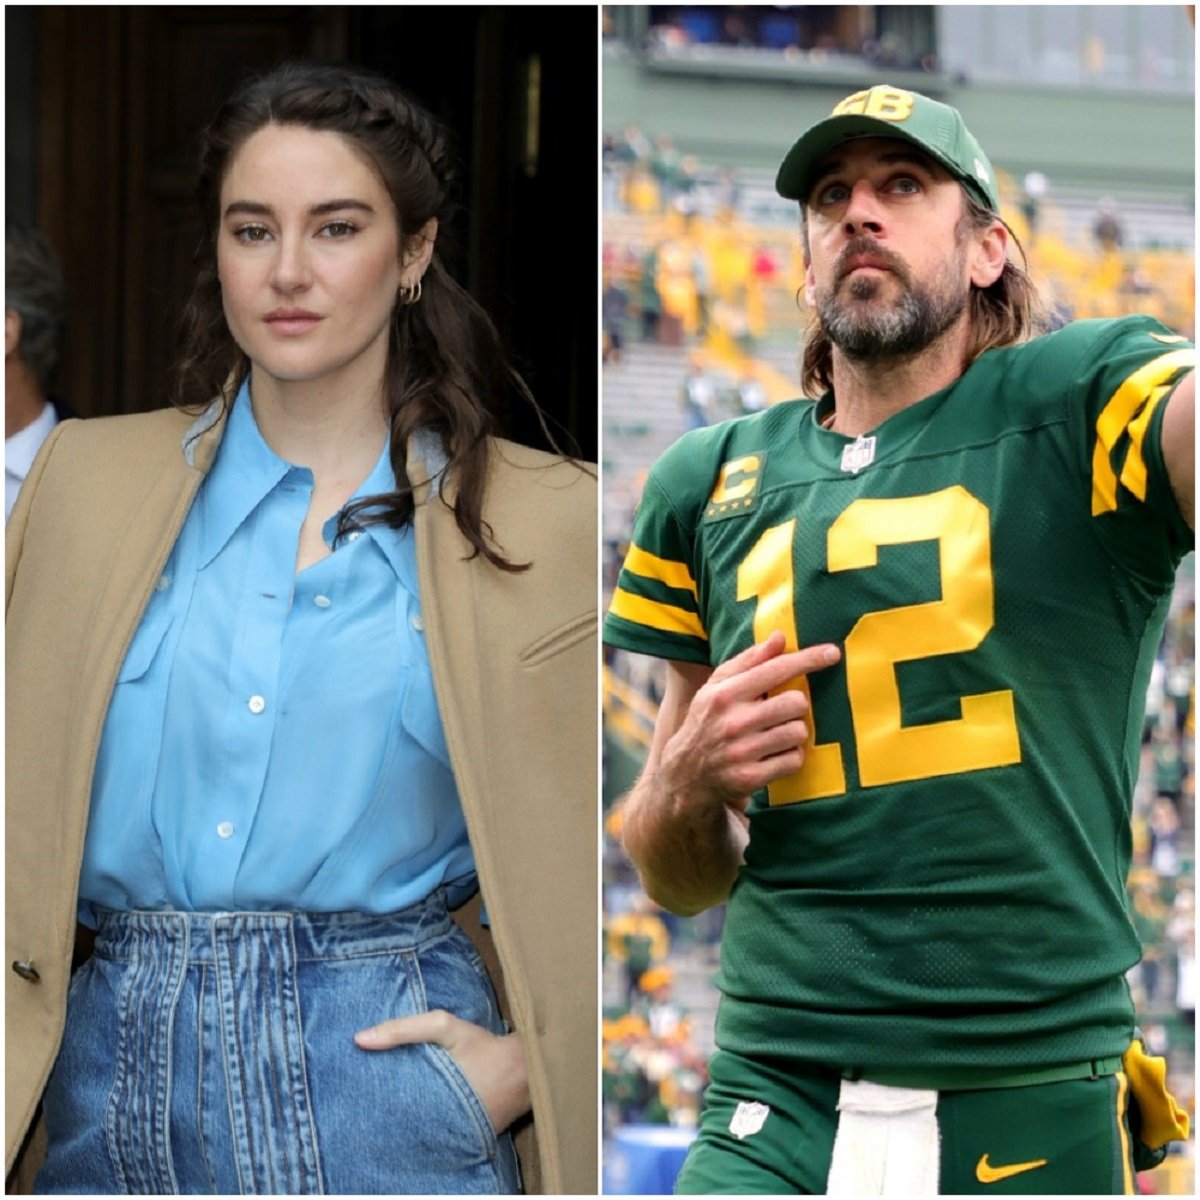 (L): Shailene Woodley dressed in blue blouse, jeans, and tan coat (R): Aaron Rodgers celebrating with his finger in the air after winning game